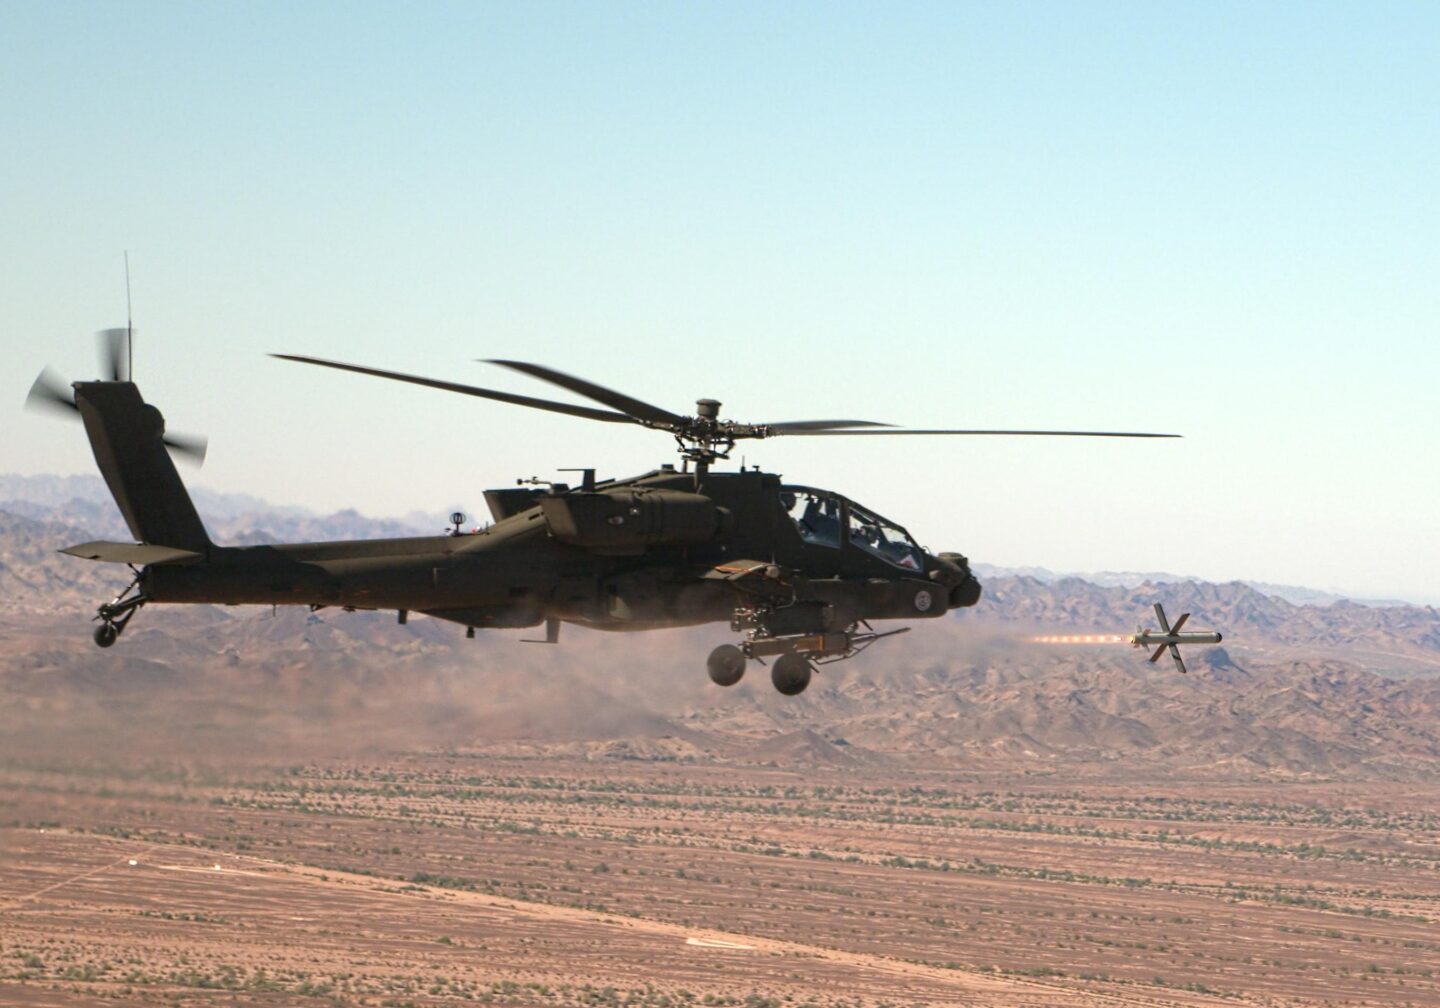 Live Fire Demo Clears Path for Spike NLOS to Arm US Army Apache Attack Helicopters